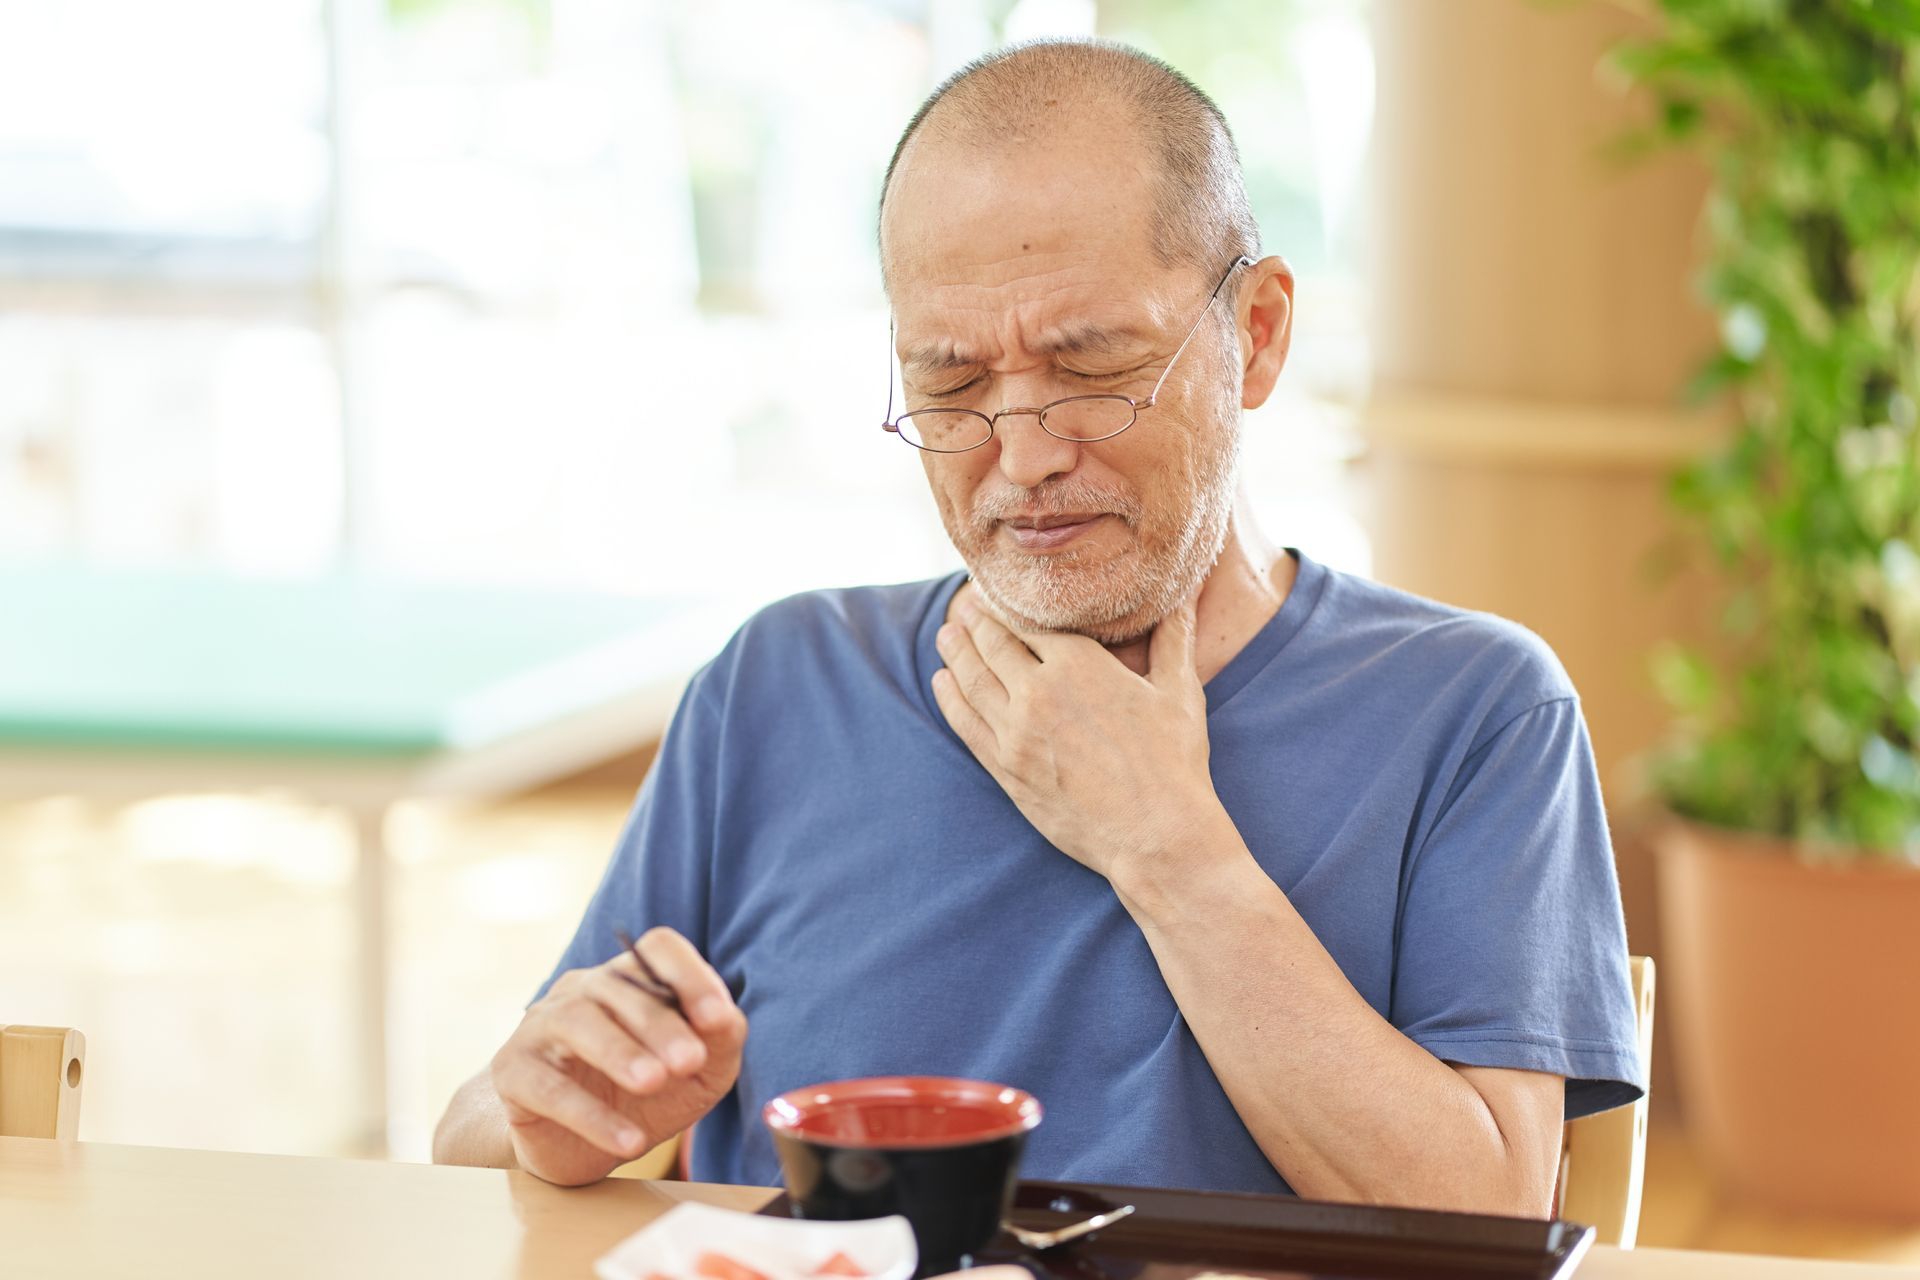 An old man sitting at a table holding his throat, looking to be struggling to swallow